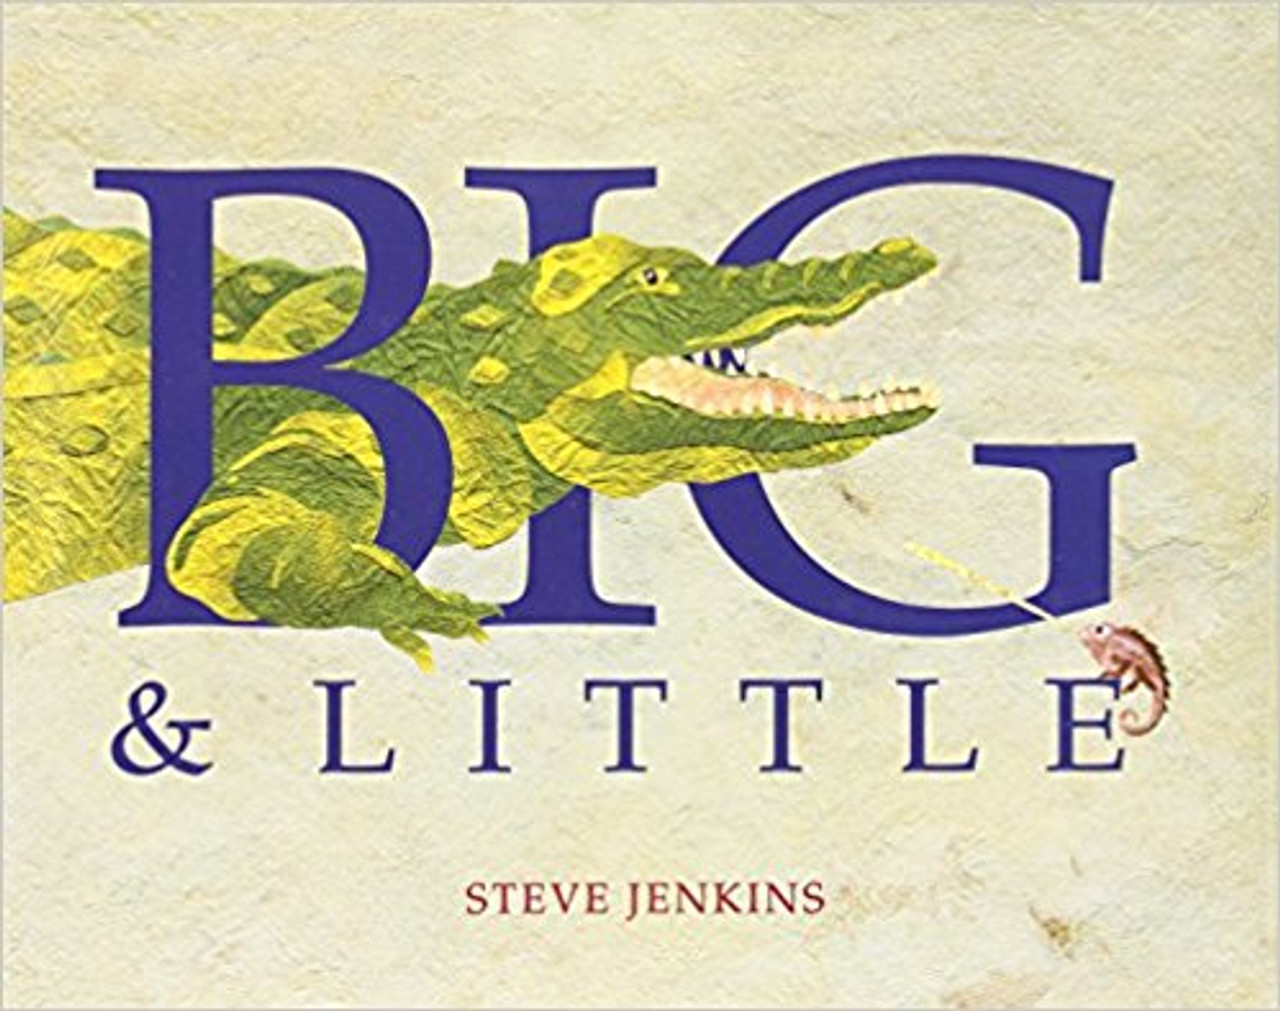 Big and Little (Hard Cover) by Steve Jenkins